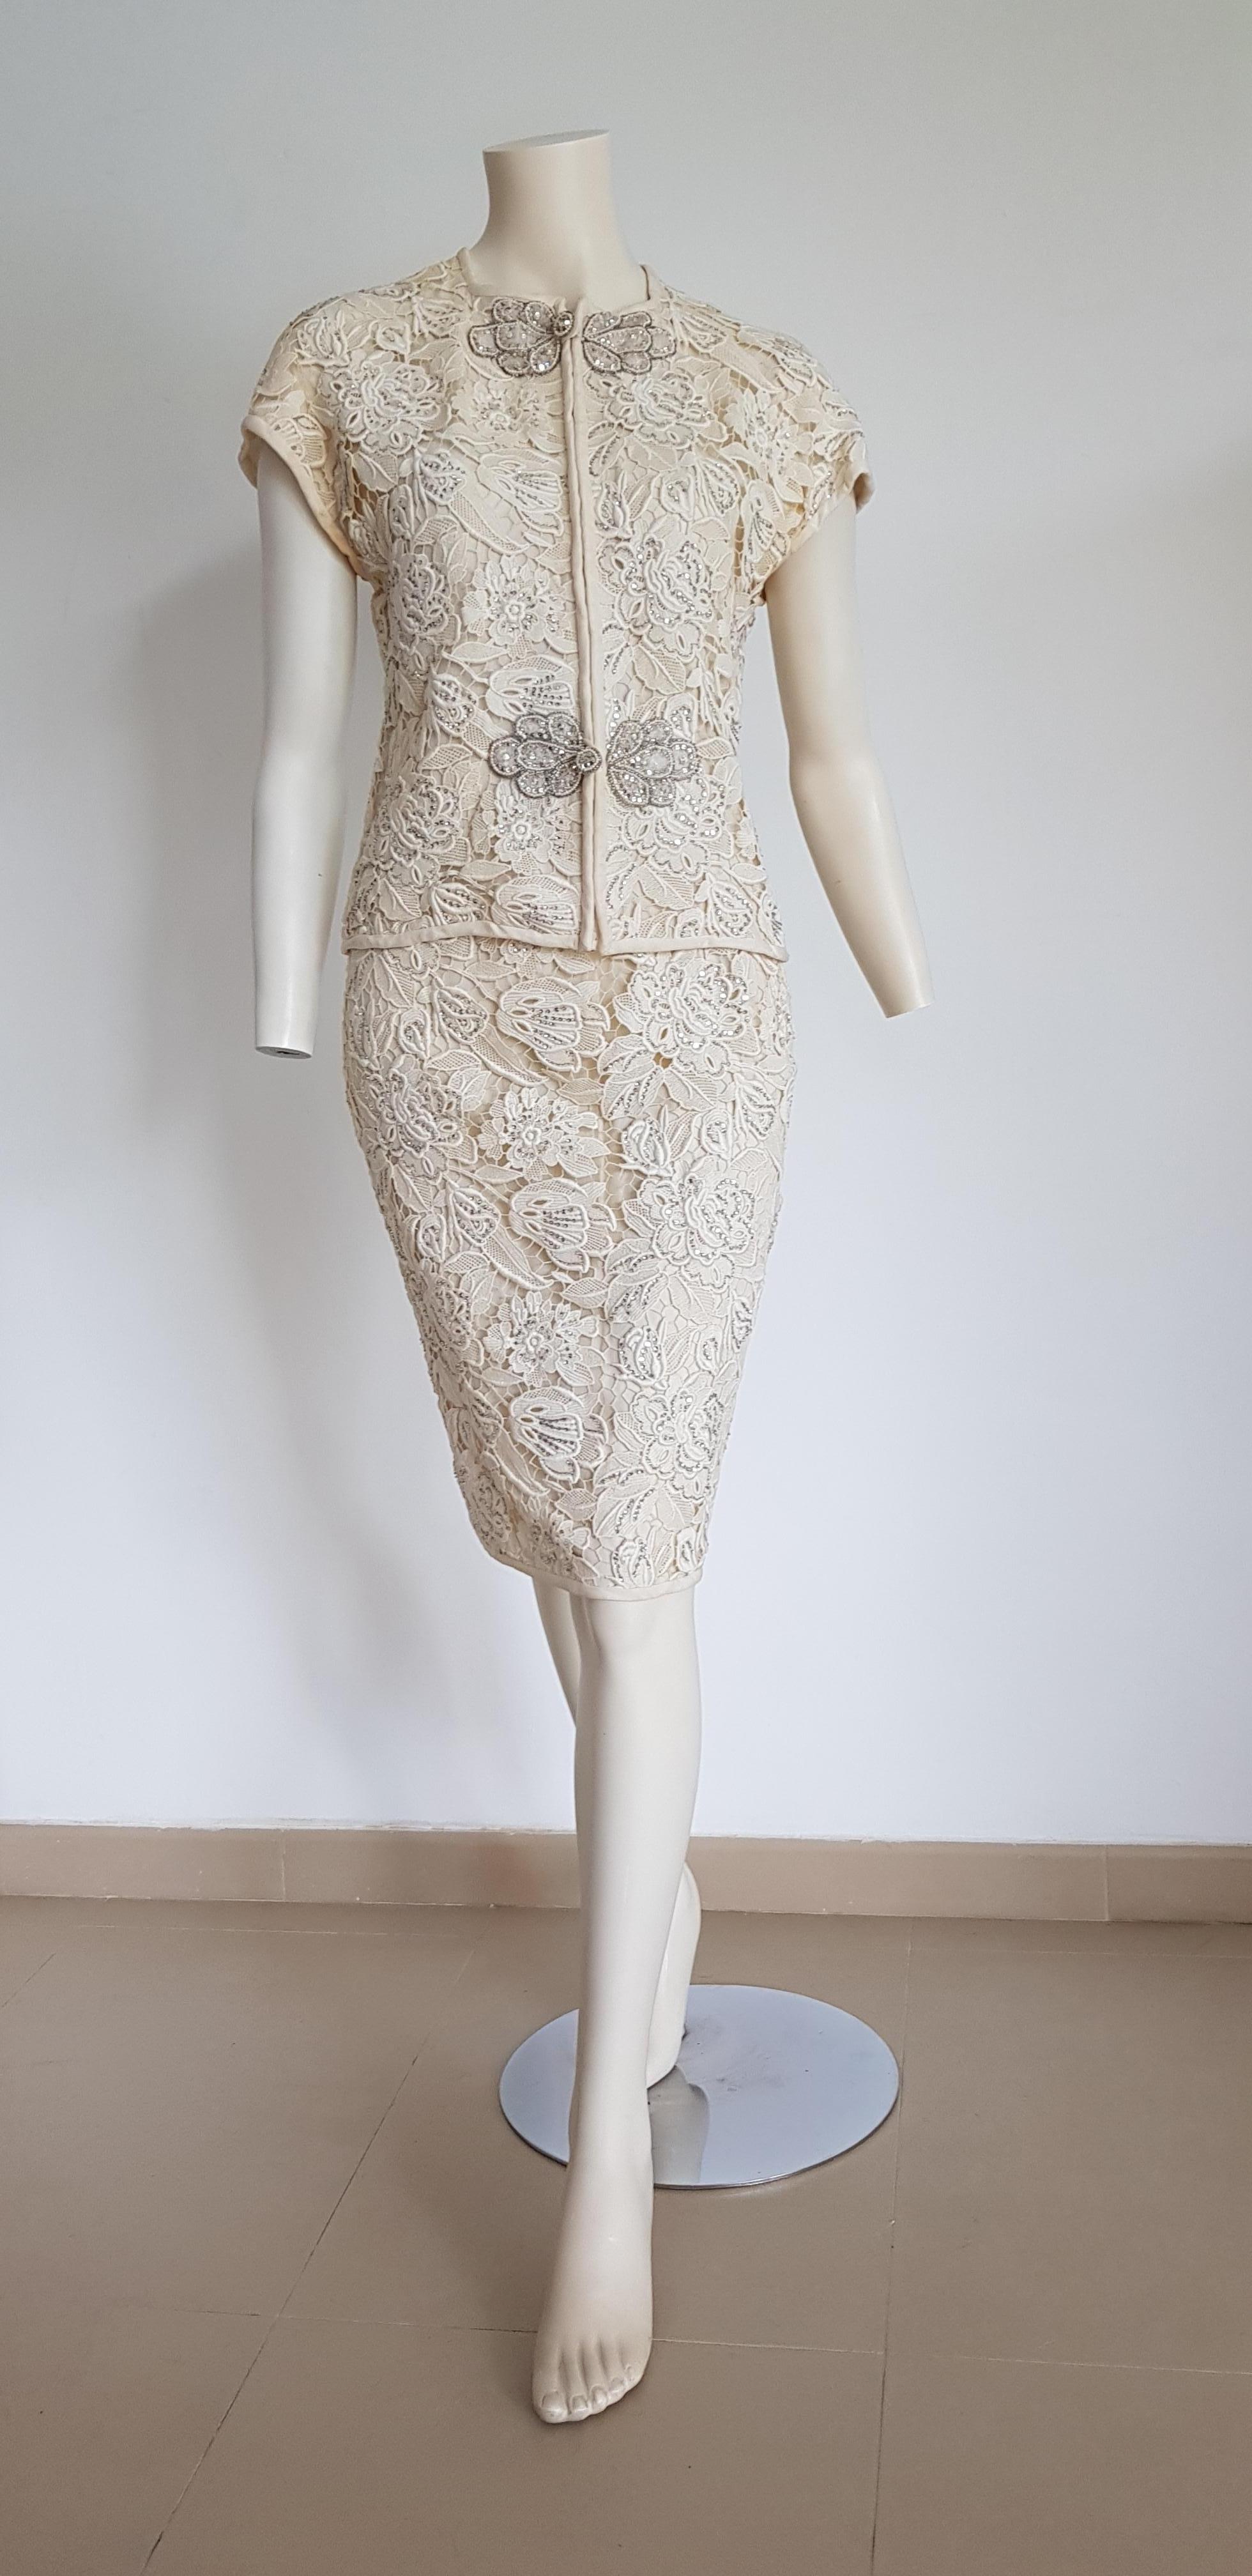 VALENTINO Haute Couture swarovski diamonds hand embroidered lace beige silk suit - Unworn. It is made entirely by hand and embroidered with silver thread. It is the only fabric so embroidered by Valentino.

SIZE: equivalent to about Small / Medium,